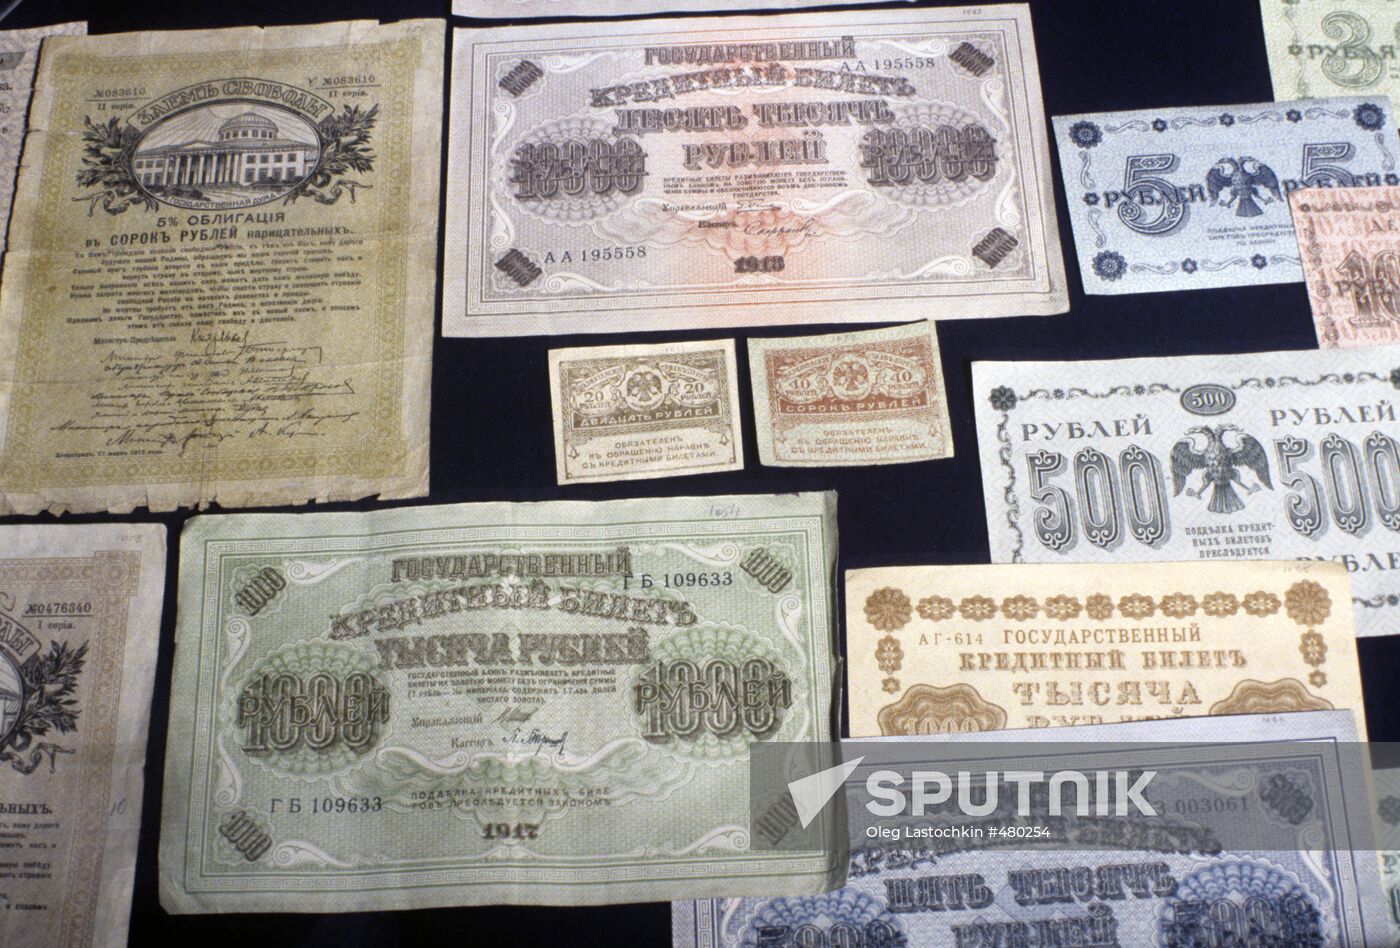 Russian banknotes of 1917-1918